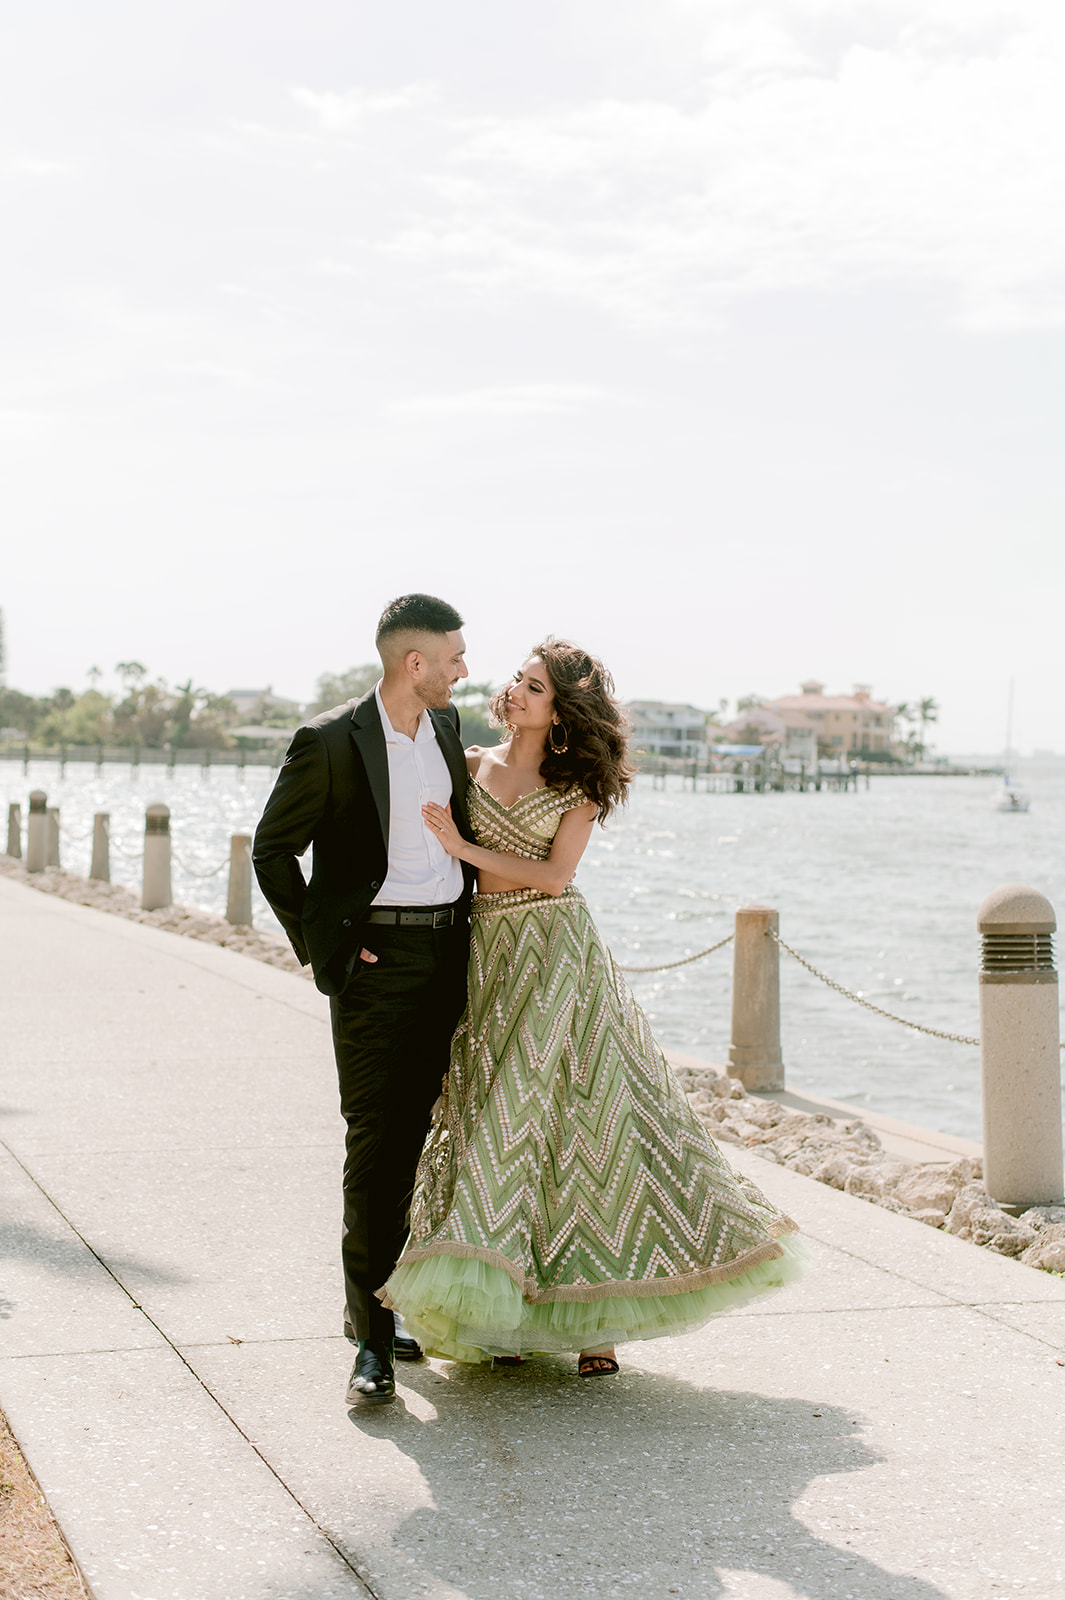 "Ringling Museum engagement shoot captures the beauty and magic of Indian love and culture"
